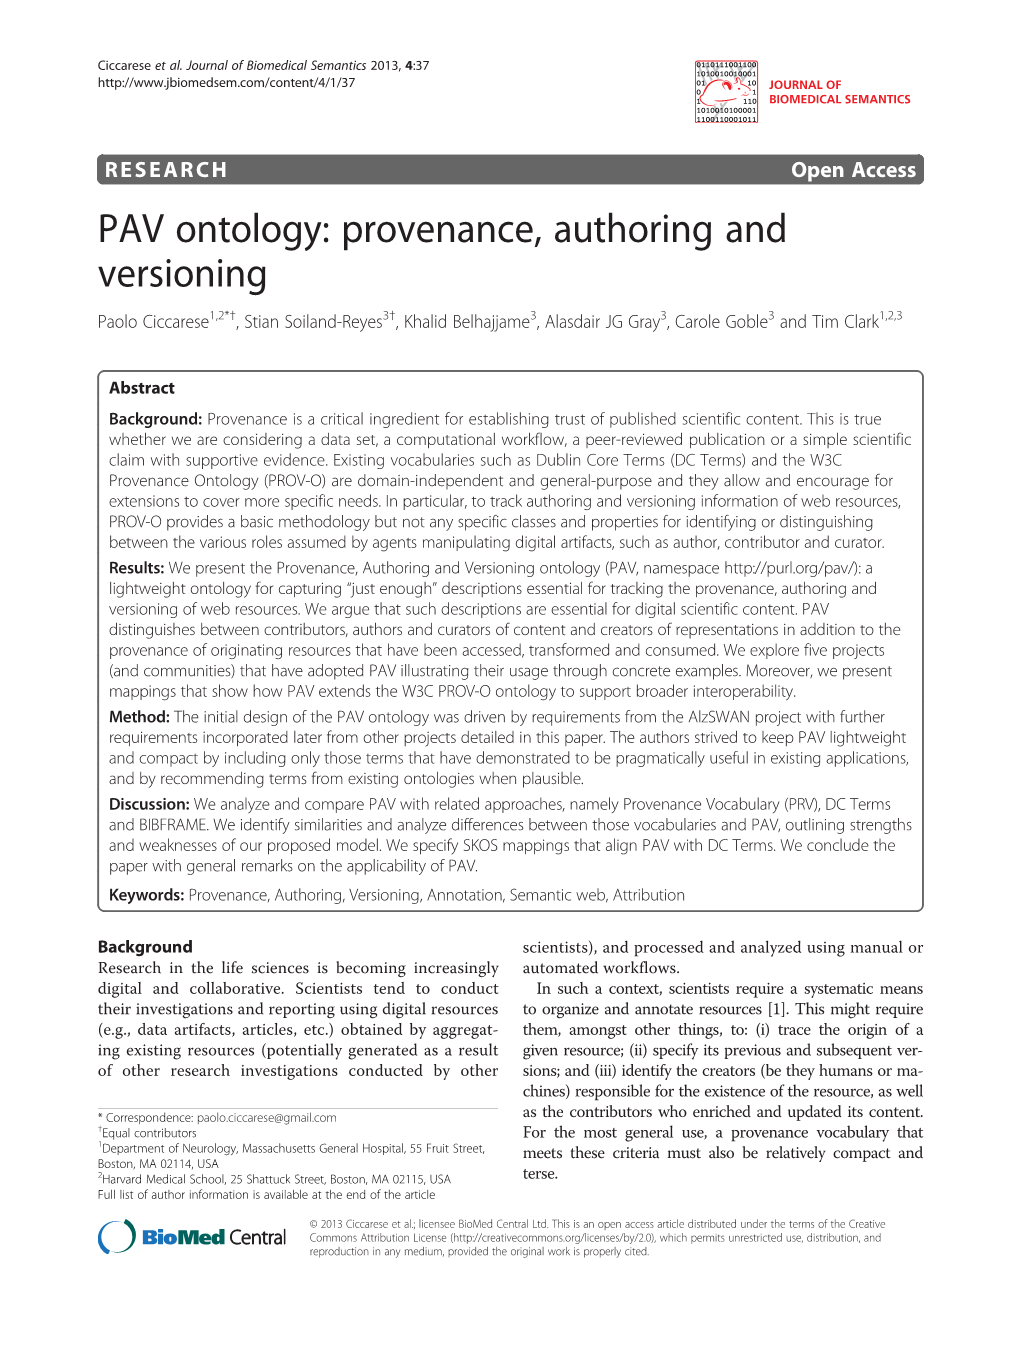 PAV Ontology: Provenance, Authoring and Versioning